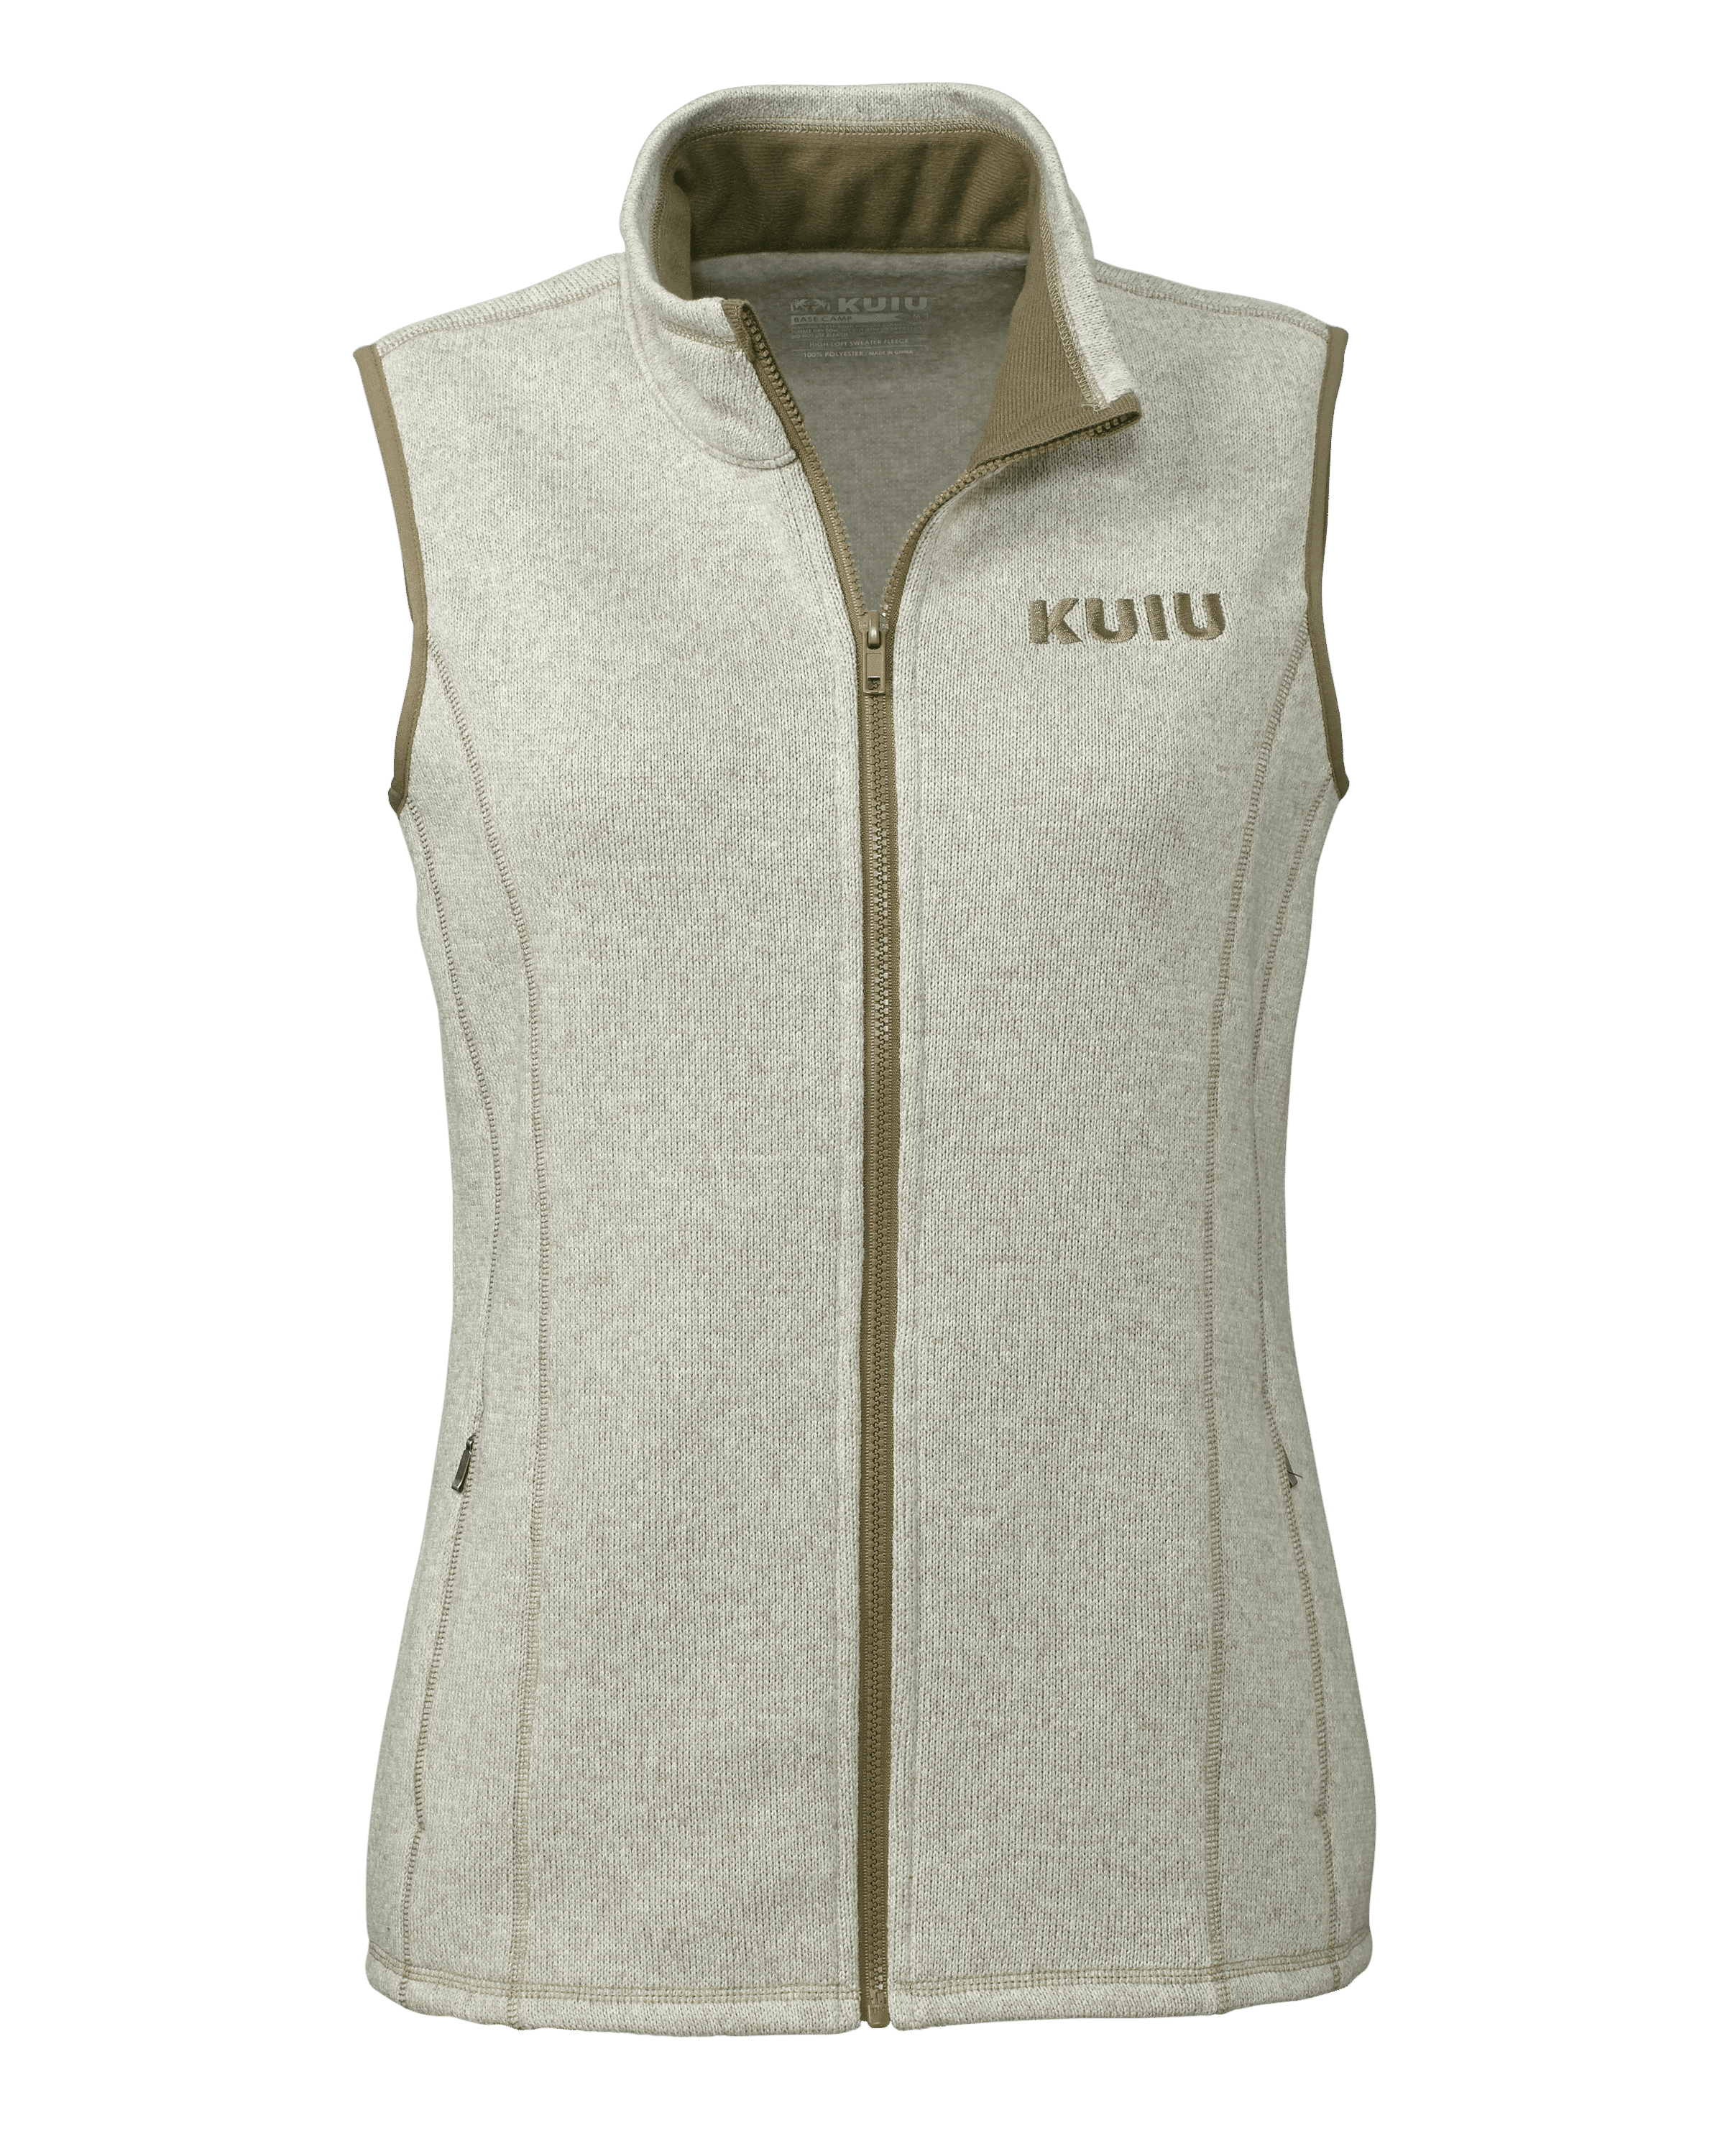 KUIU Outlet Women's Base Camp Sweater Vest in Oatmeal | Size XL